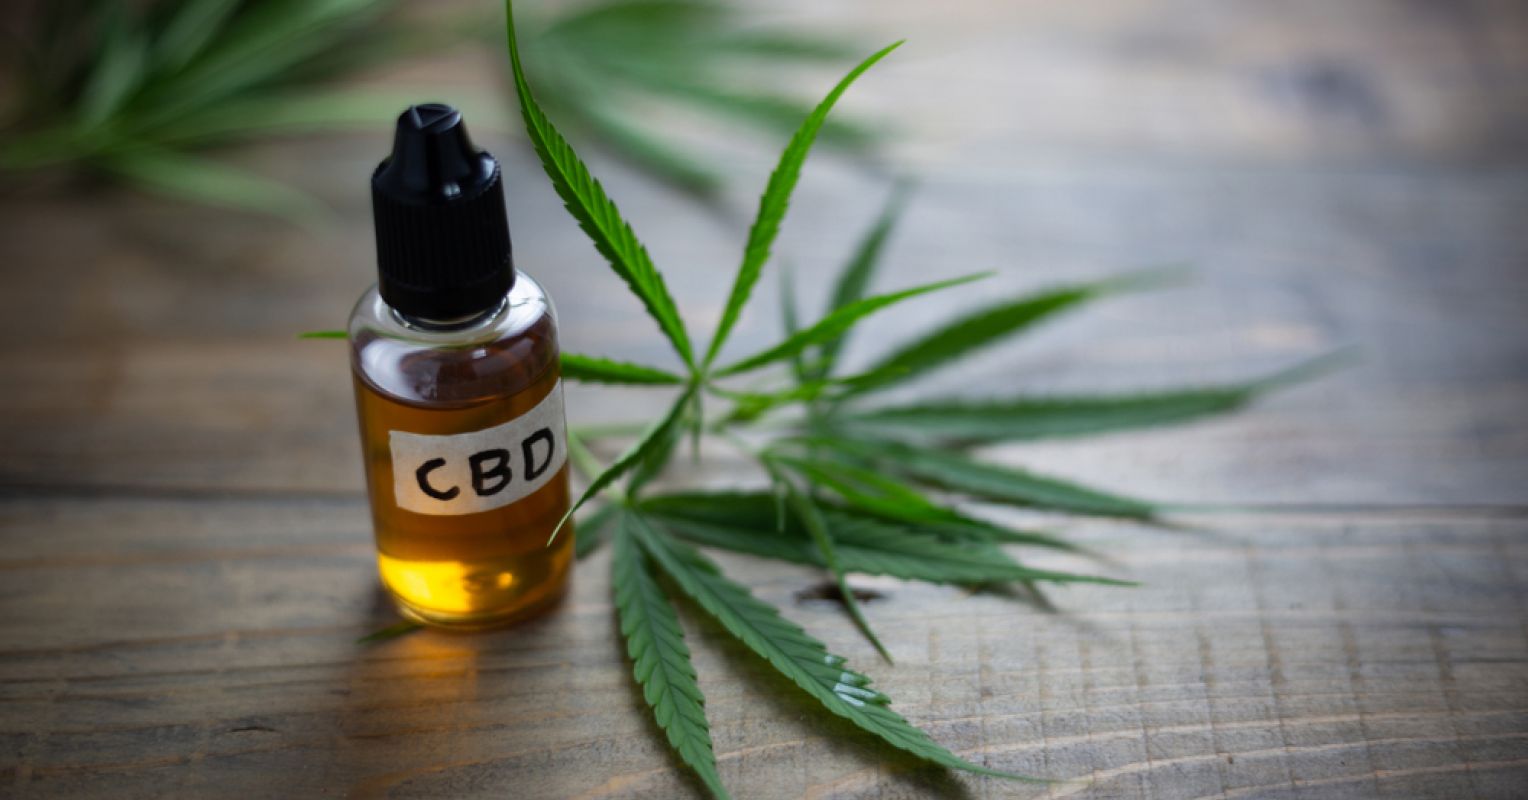 Find What A Pro Has To Say On The Good CBD Online Store